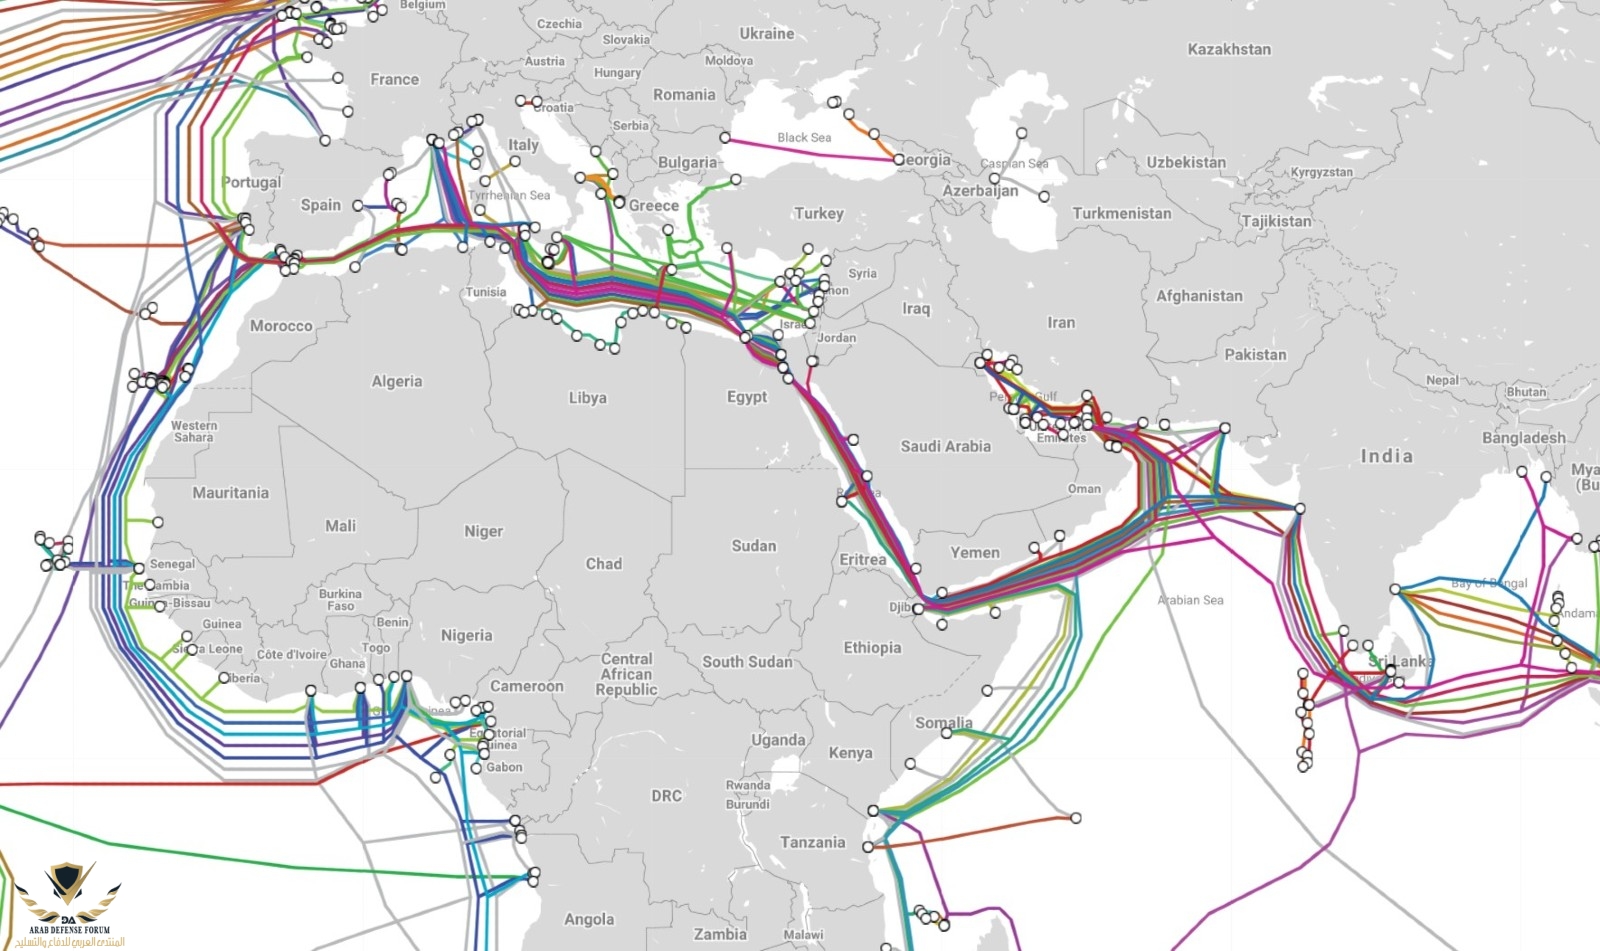 Sub-sea-cables-map-1600px.jpg